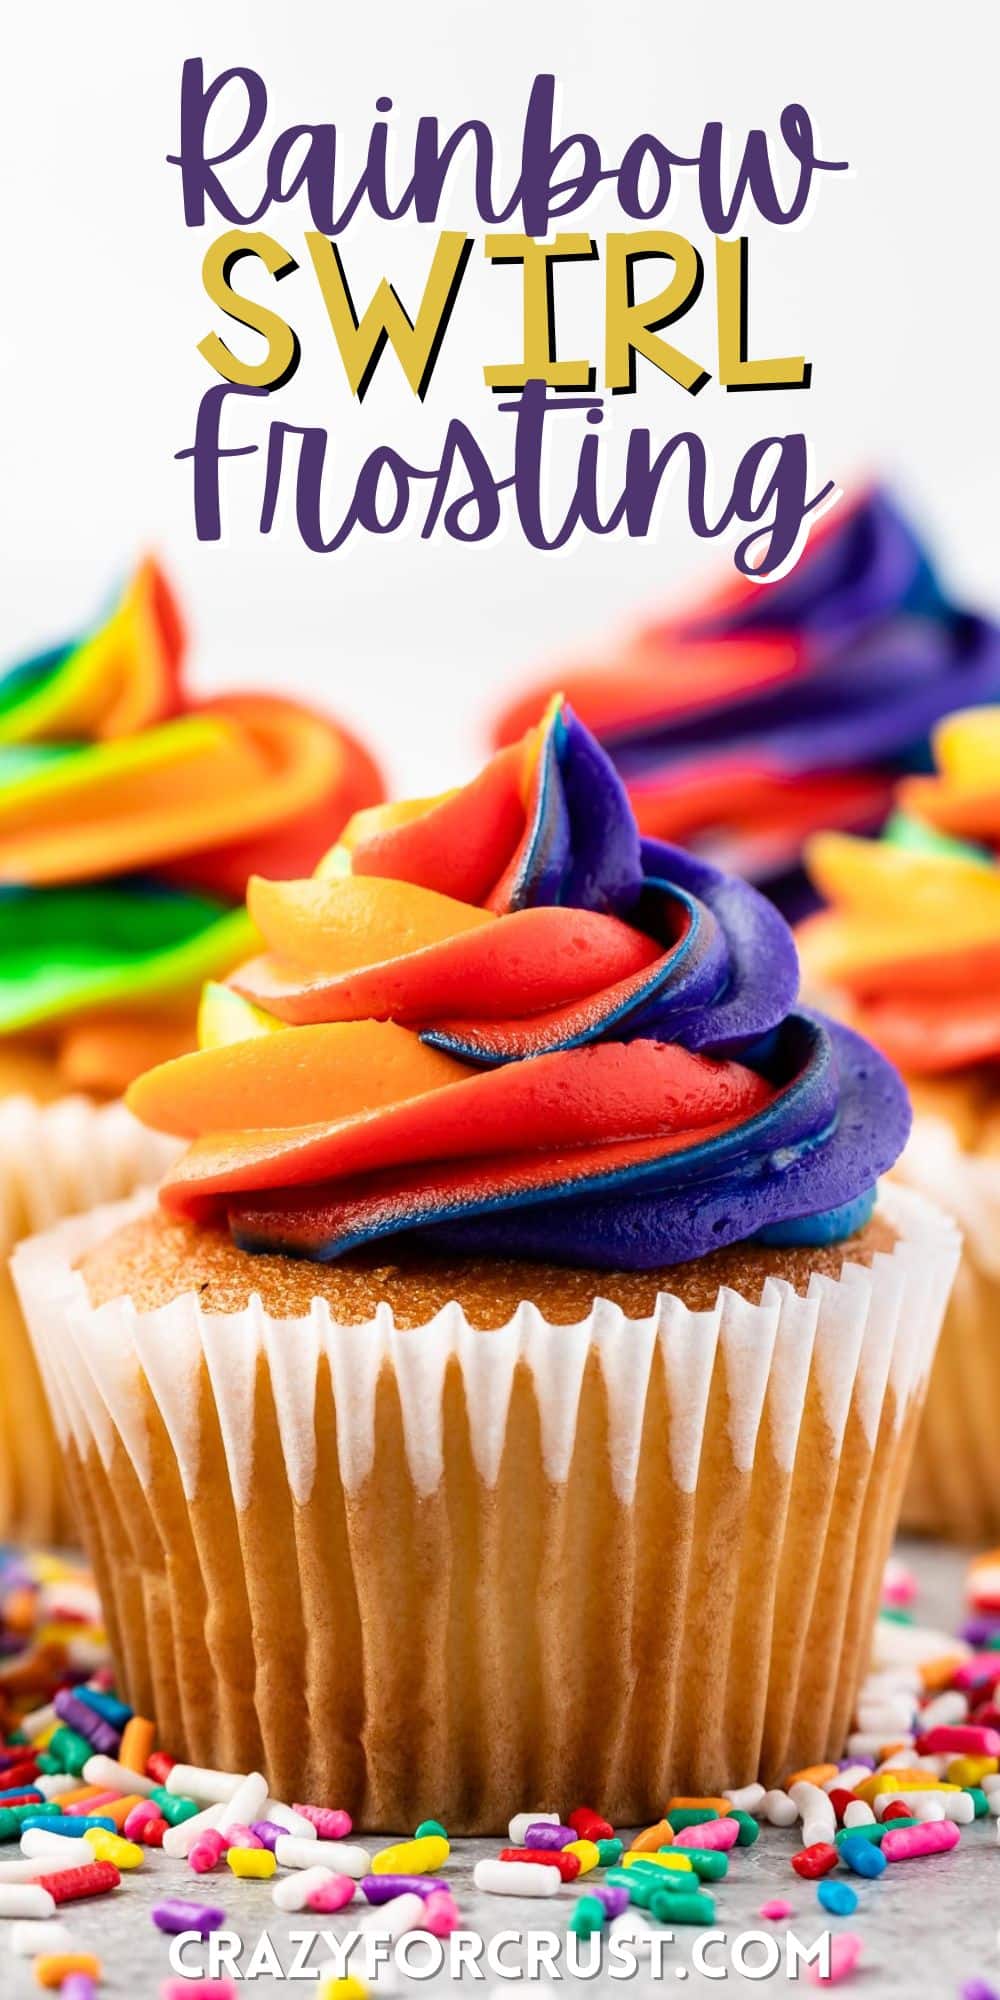 vanilla cupcakes with rainbow colored frosting on top with words on the image.